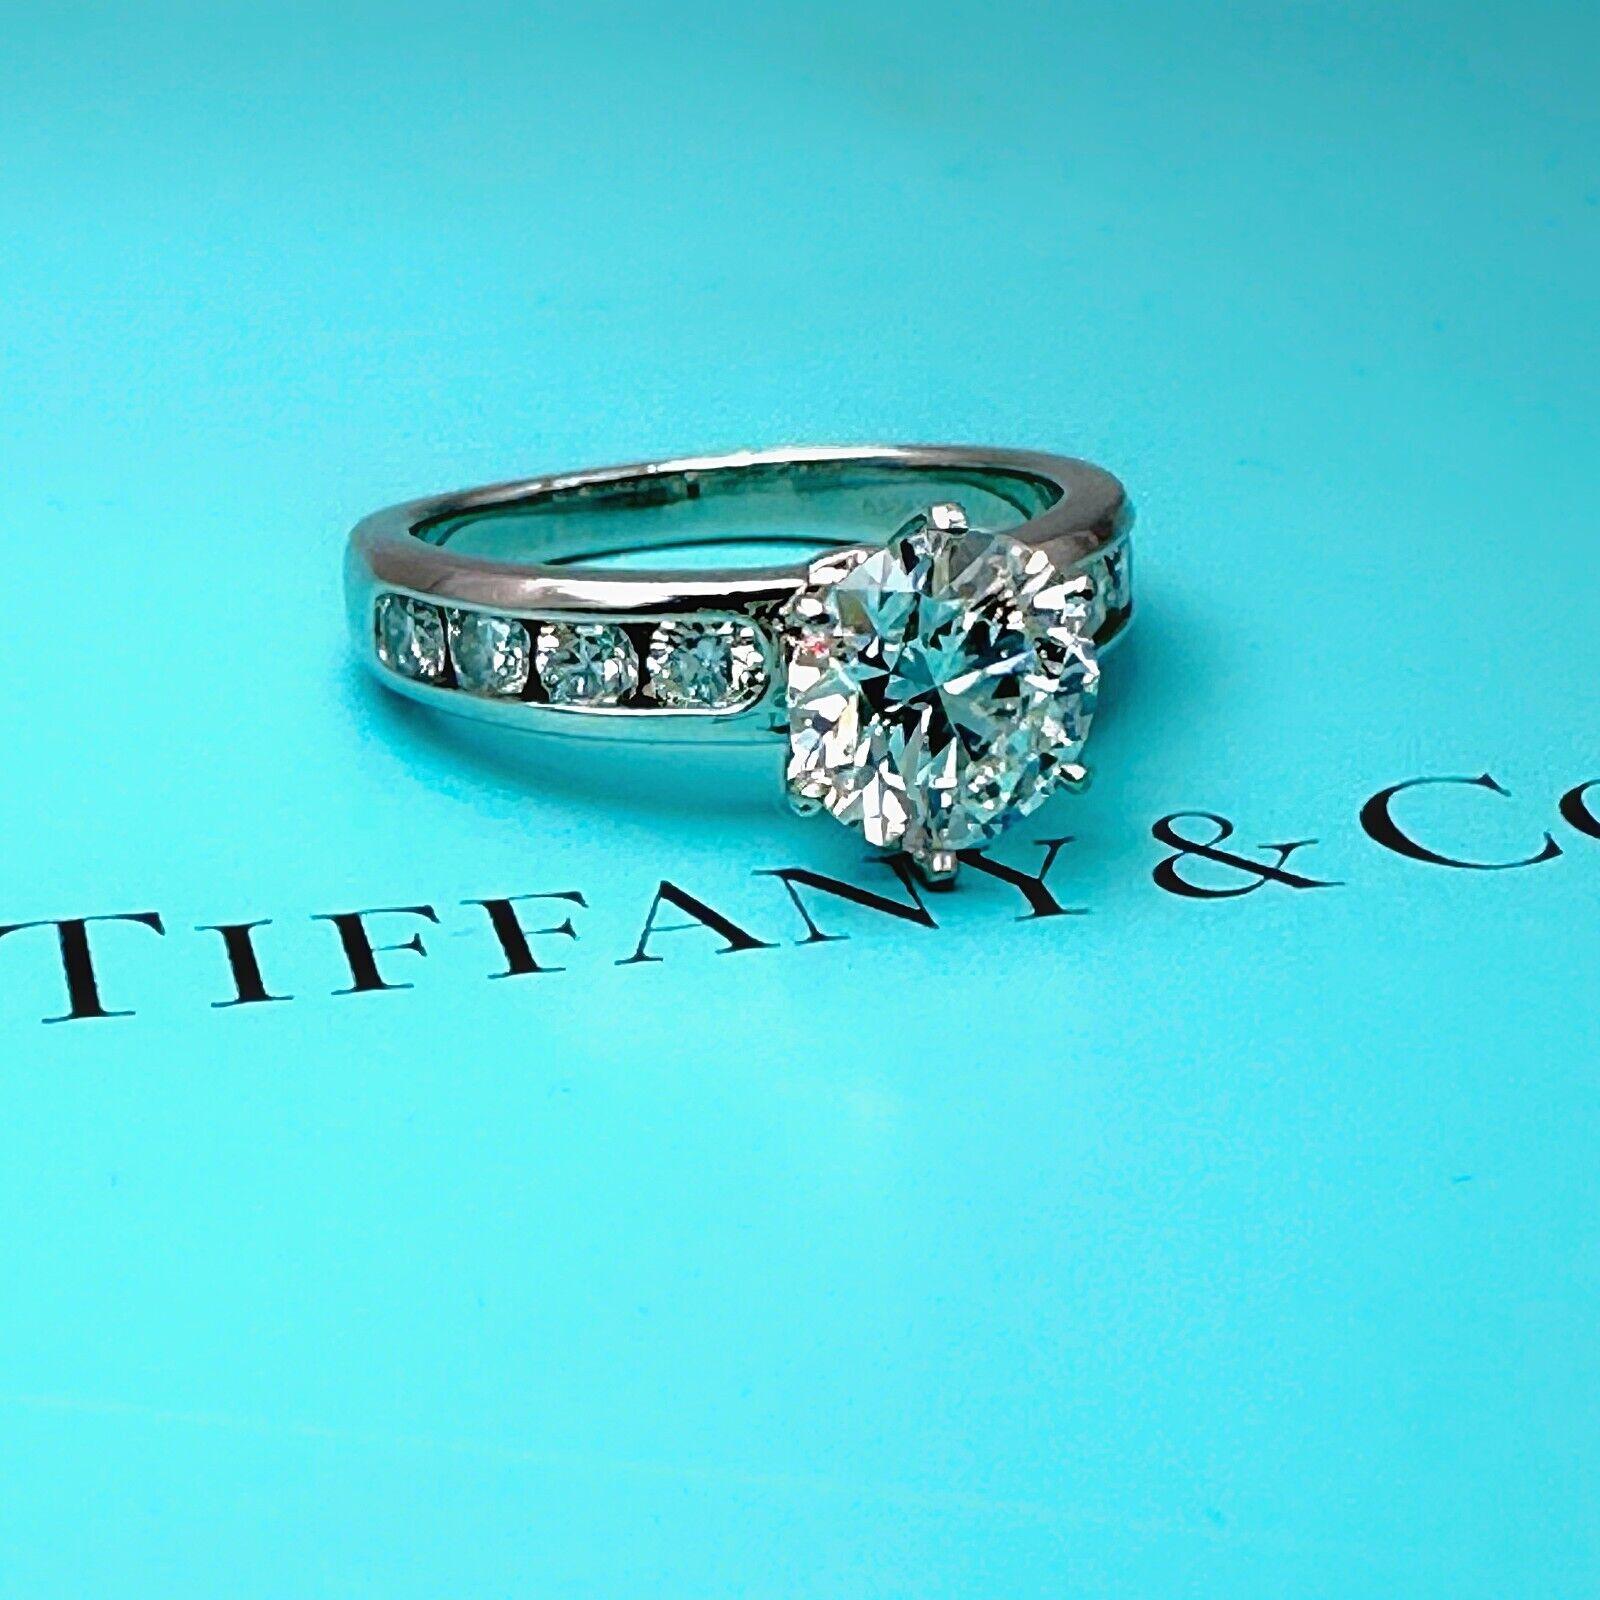 Tiffany & Co. 2.75 tcw Tiffany Setting Channel-Set Diamond Band Eng Ring Plat For Sale 1